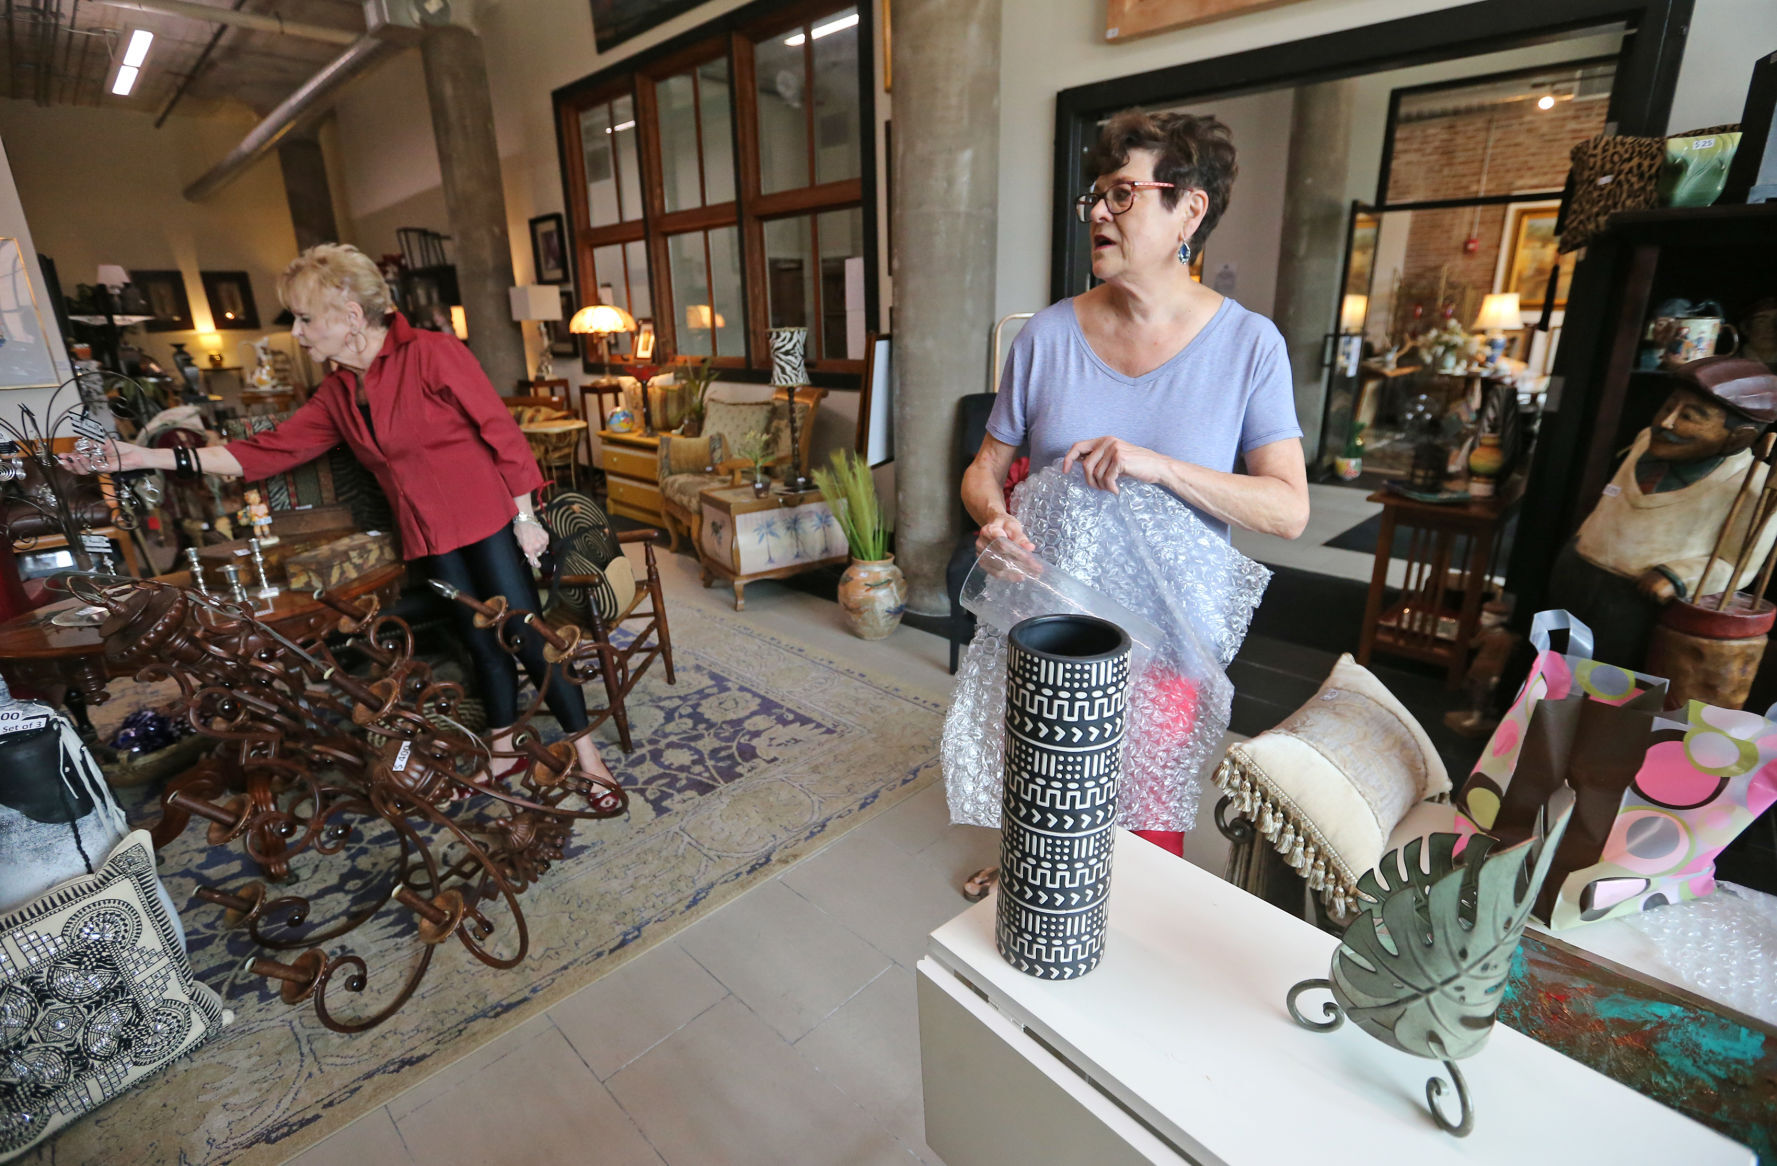 Audrey Wallis (right) talks with customer Carol Bush, of East Dubuque, Ill., at The Consignment Store in the Novelty Iron Works building in Dubuque on Friday, July 23, 2021.    PHOTO CREDIT: JESSICA REILLY